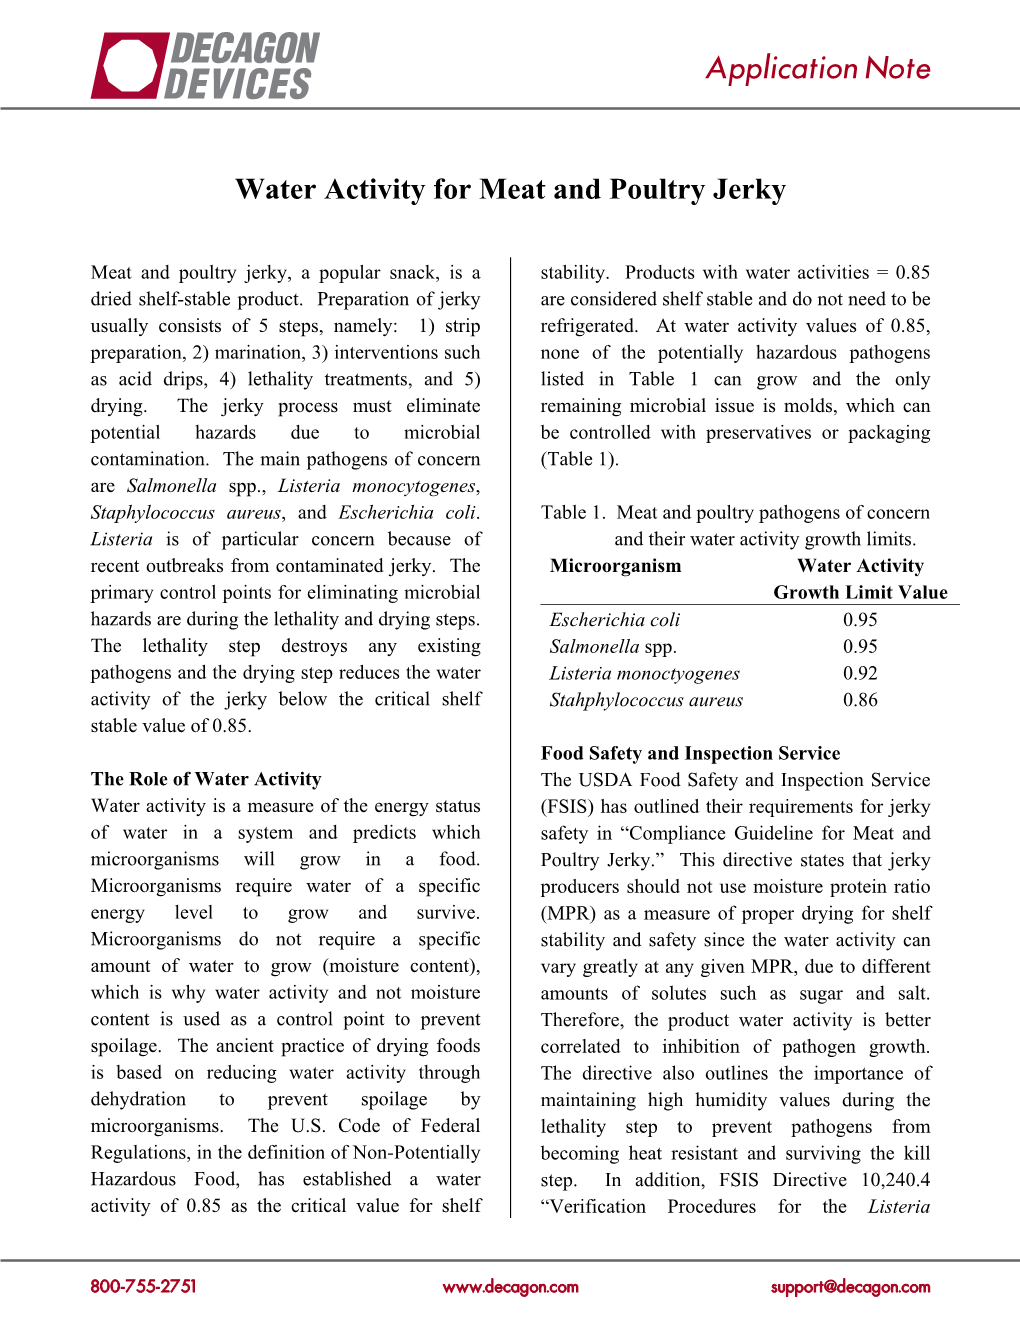 Application Note Water Activity for Meat and Poultry Jerky